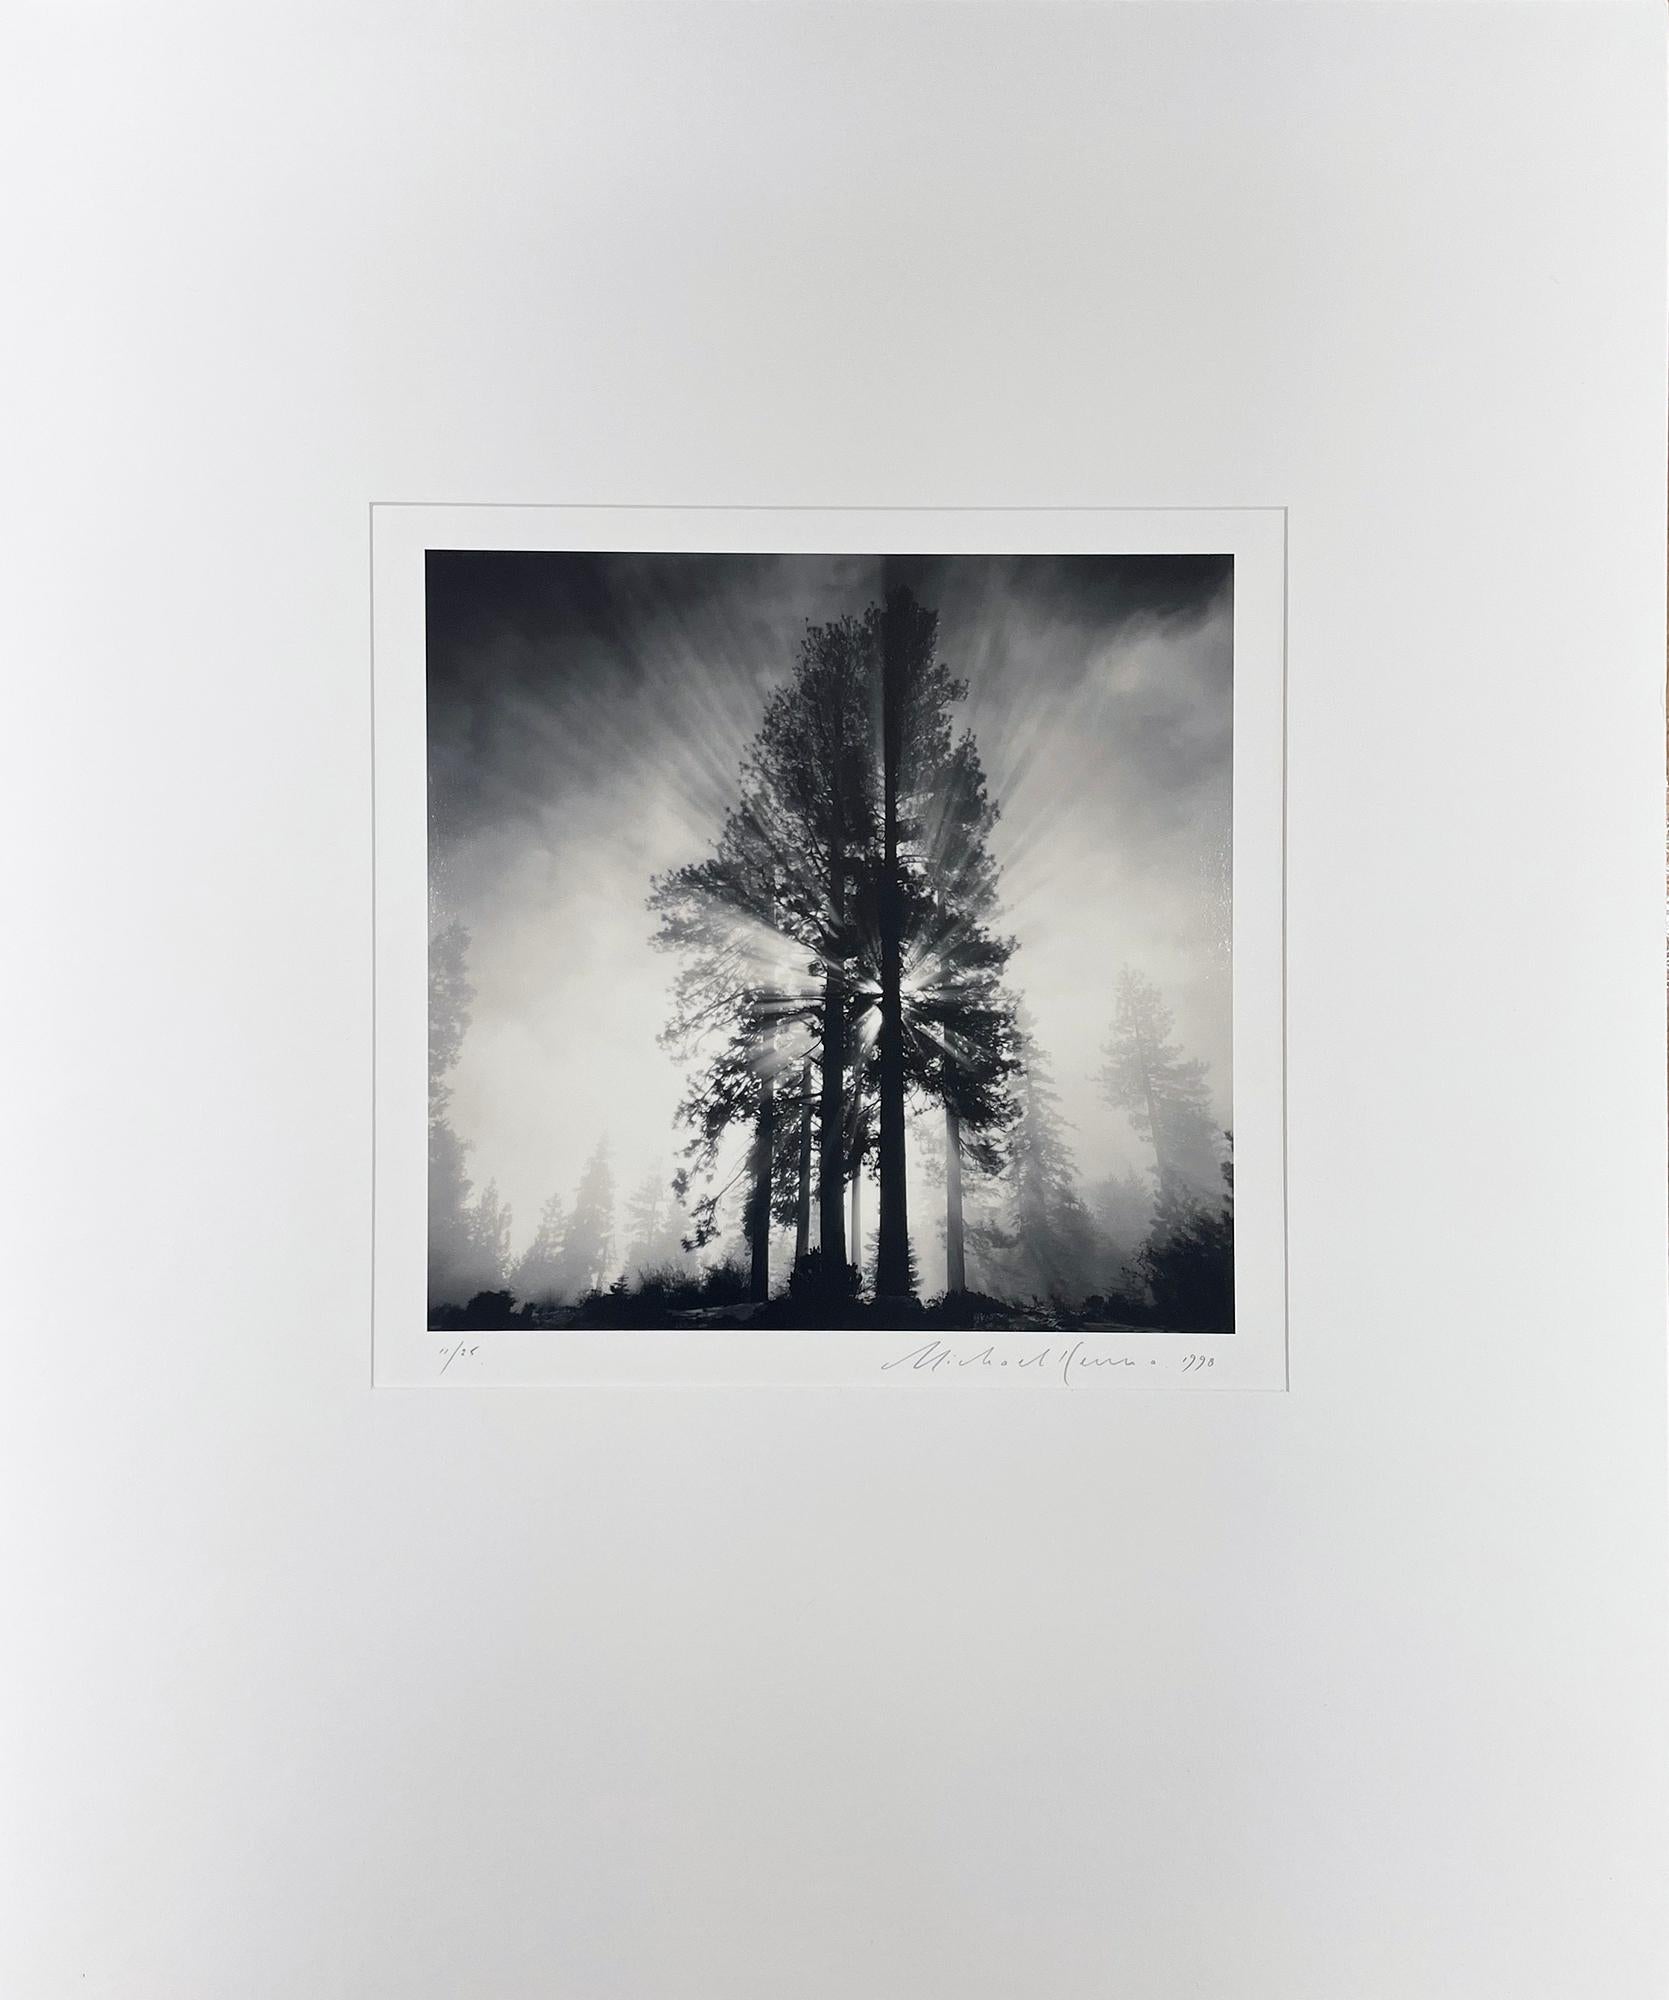 Avenue of Giants, Humbolt, California, USA by Michael Kenna, 1998 For Sale 1